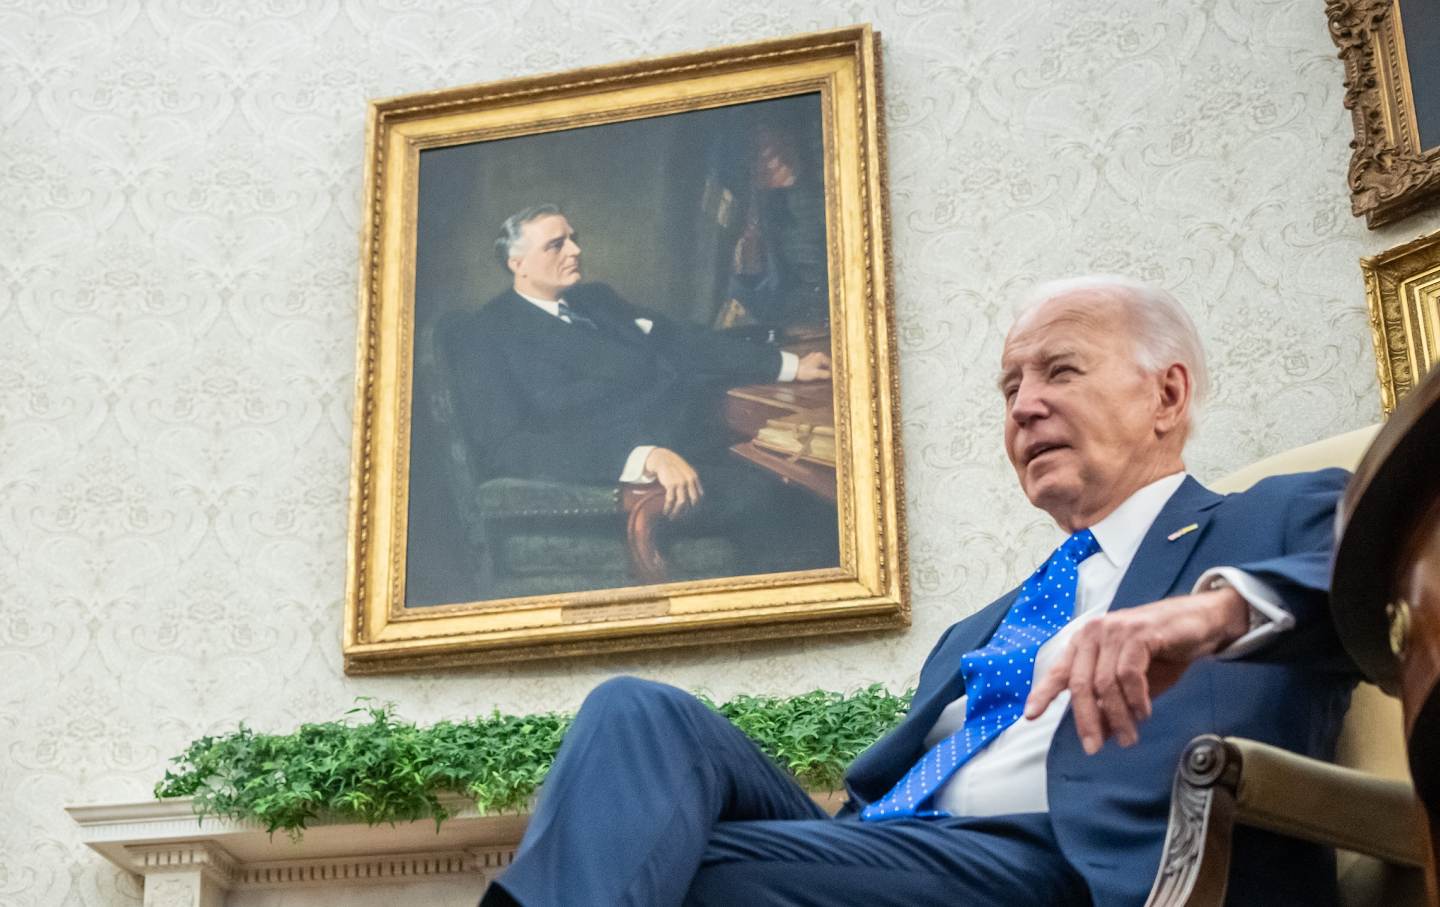 Joe Biden during a bilateral meeting in the Oval Office on February 9, 2024.